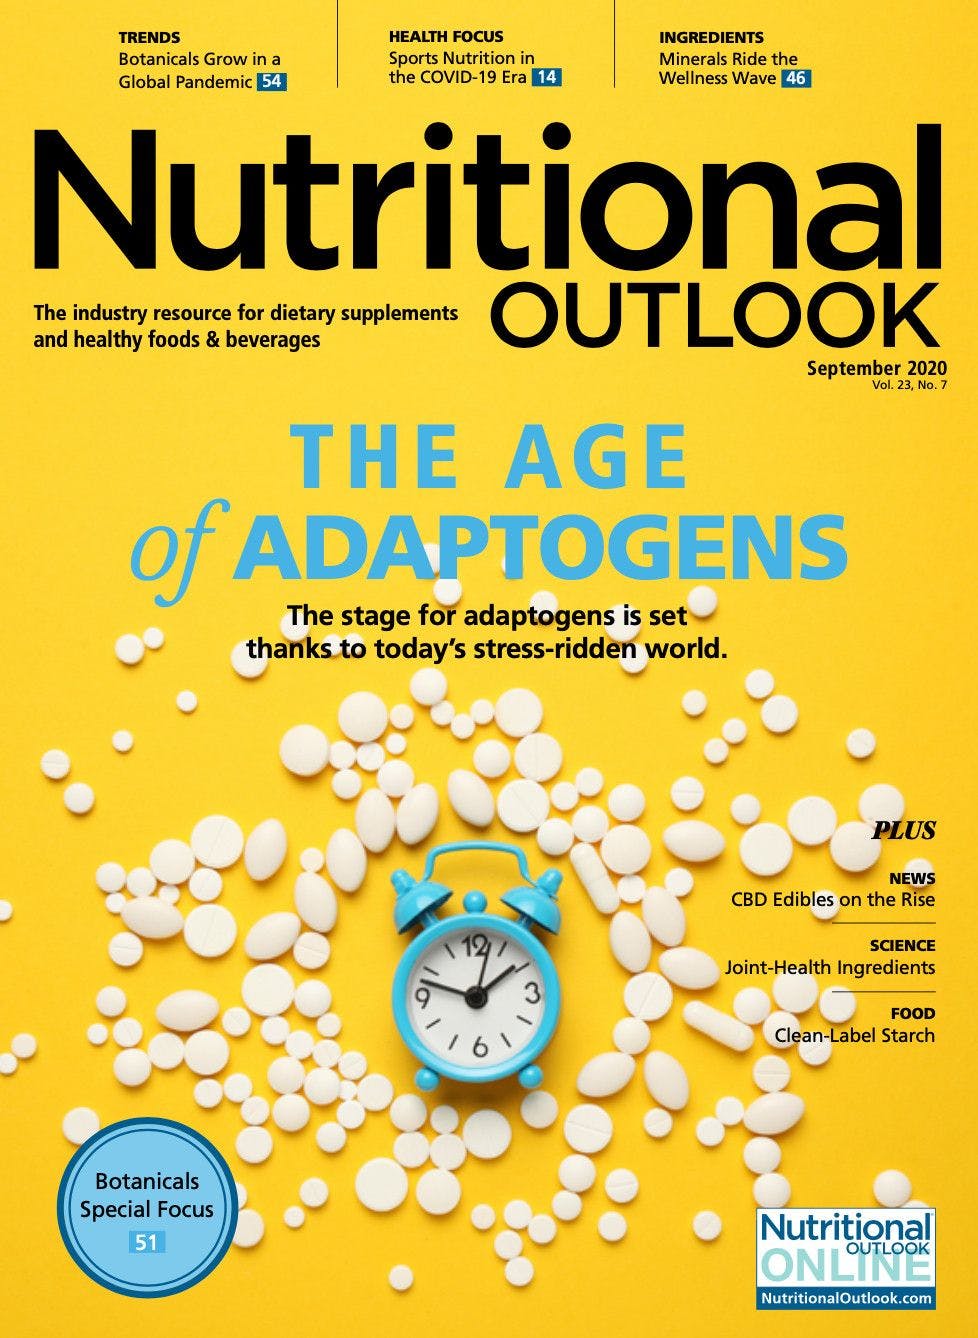 Nutritional Outlook Vol. 23 No. 7